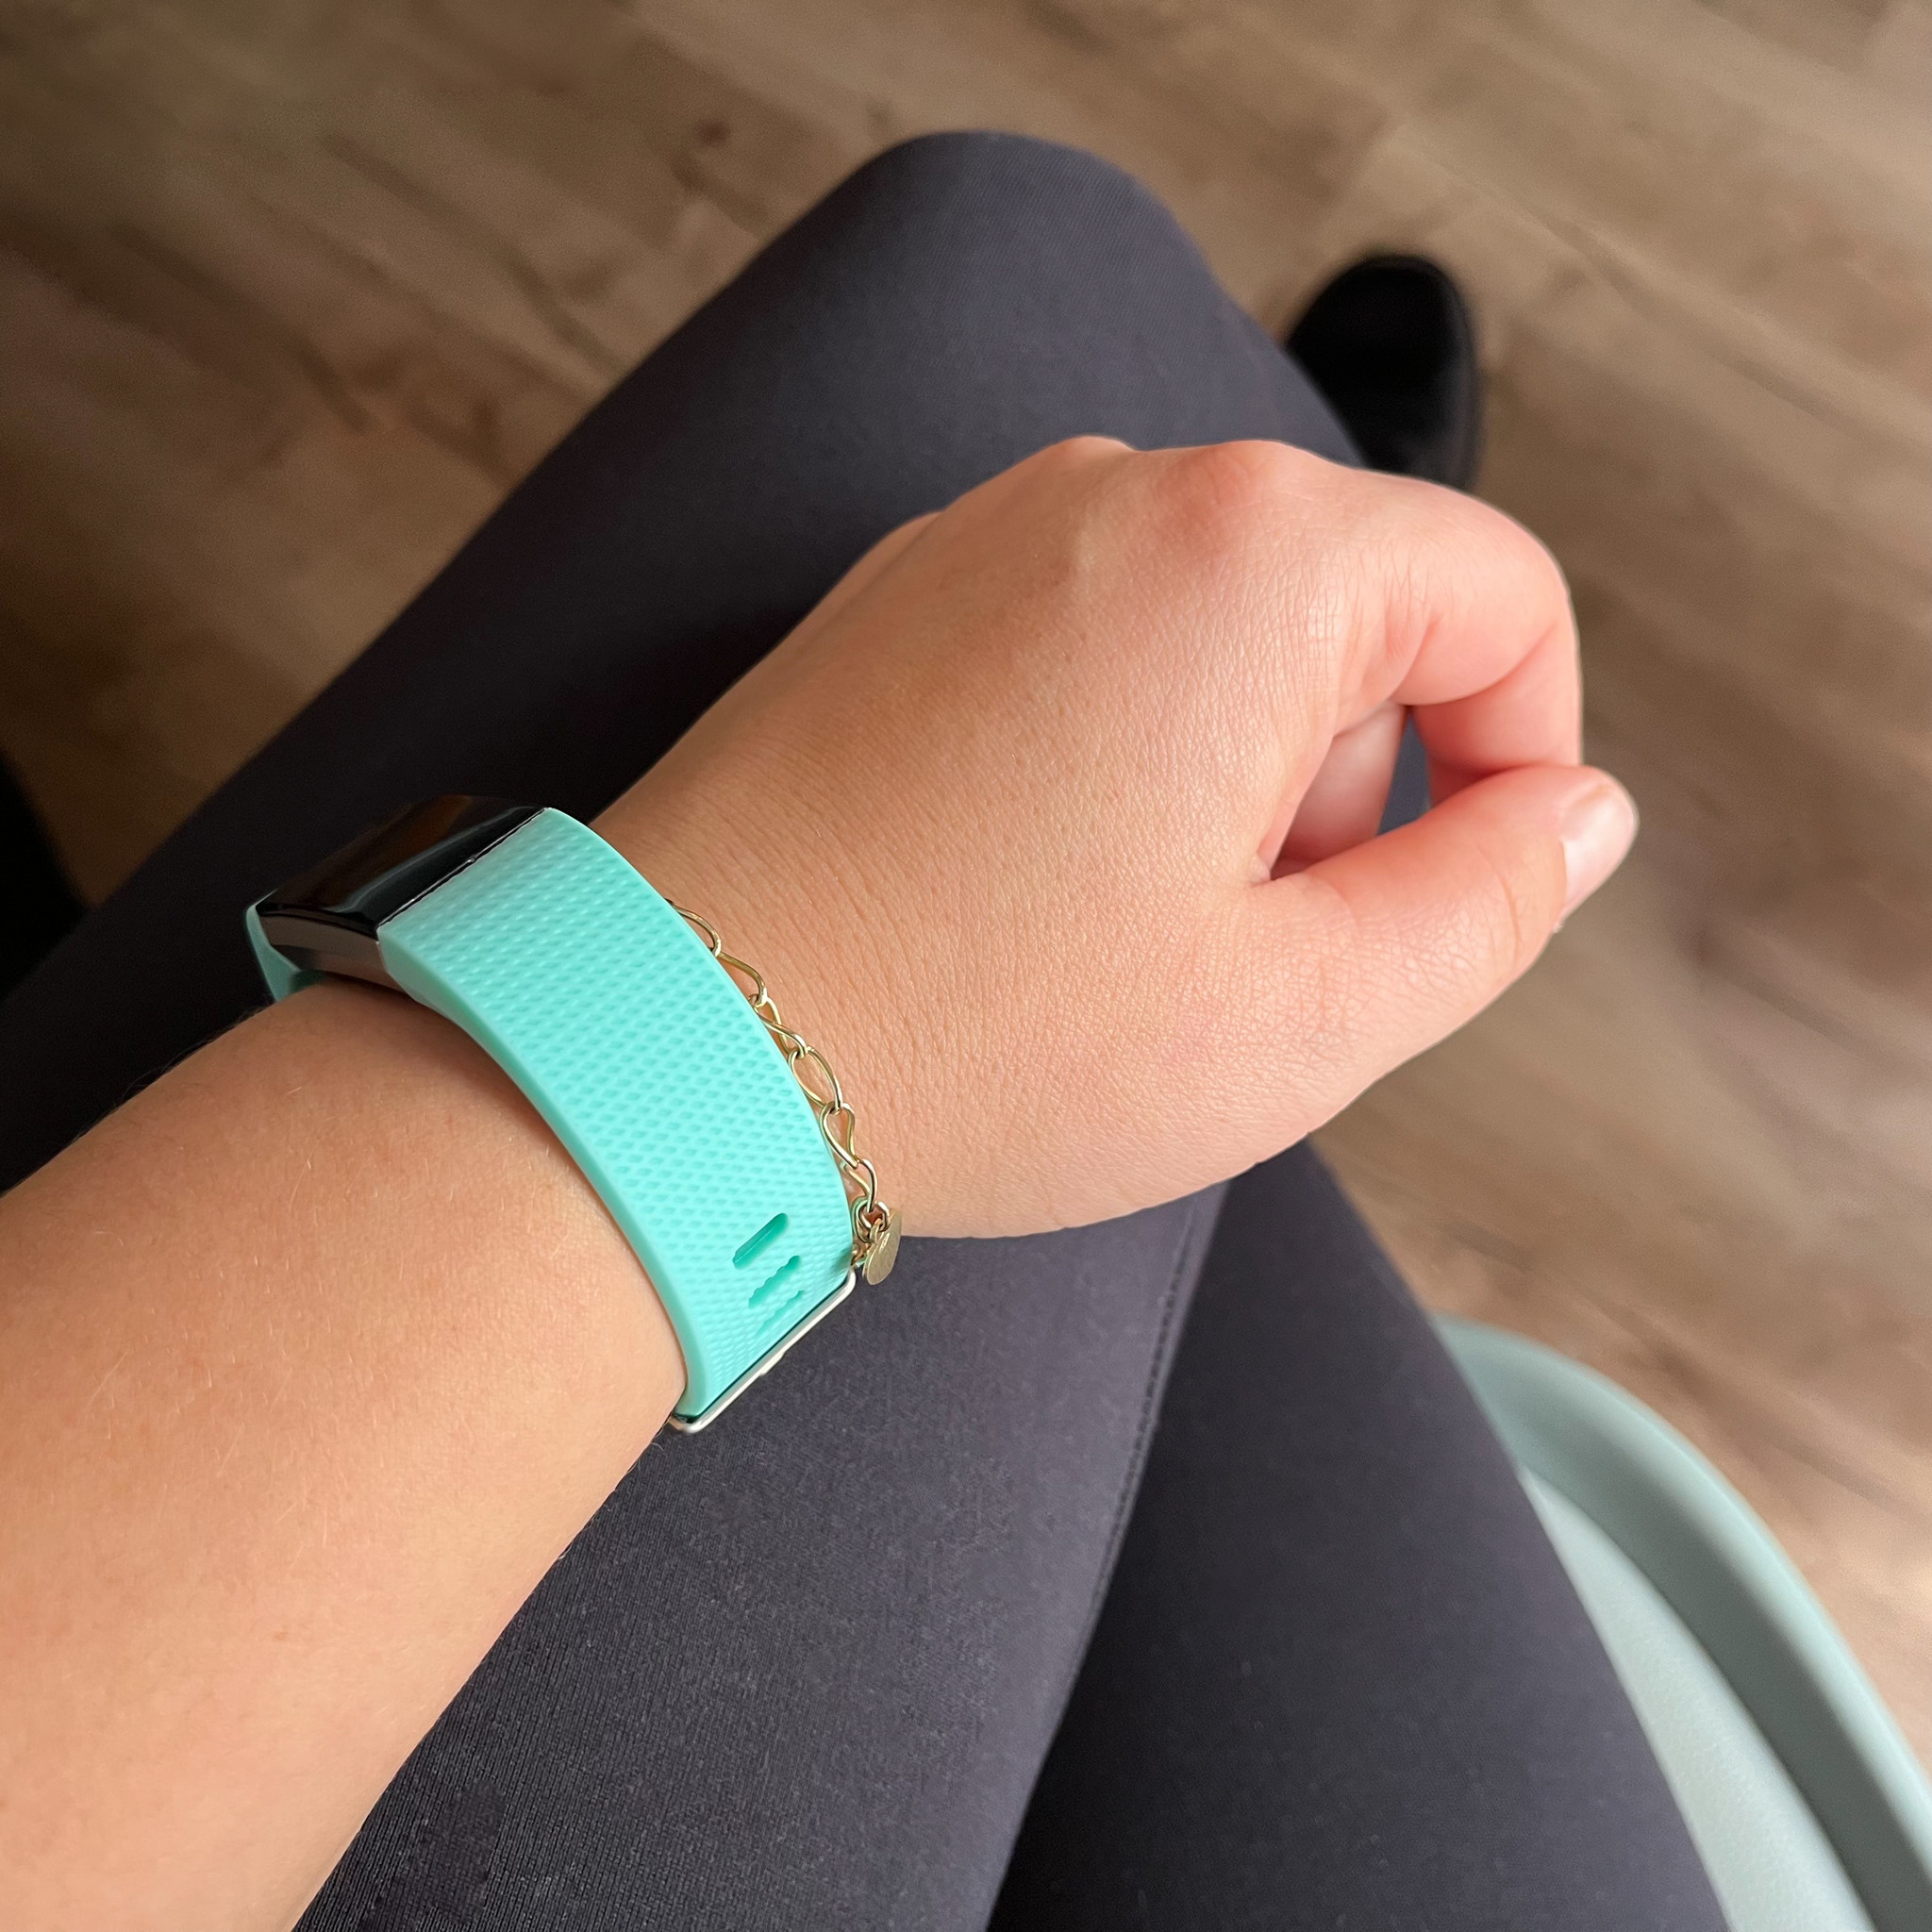 Fitbit Charge 2 sport band - groenblauw